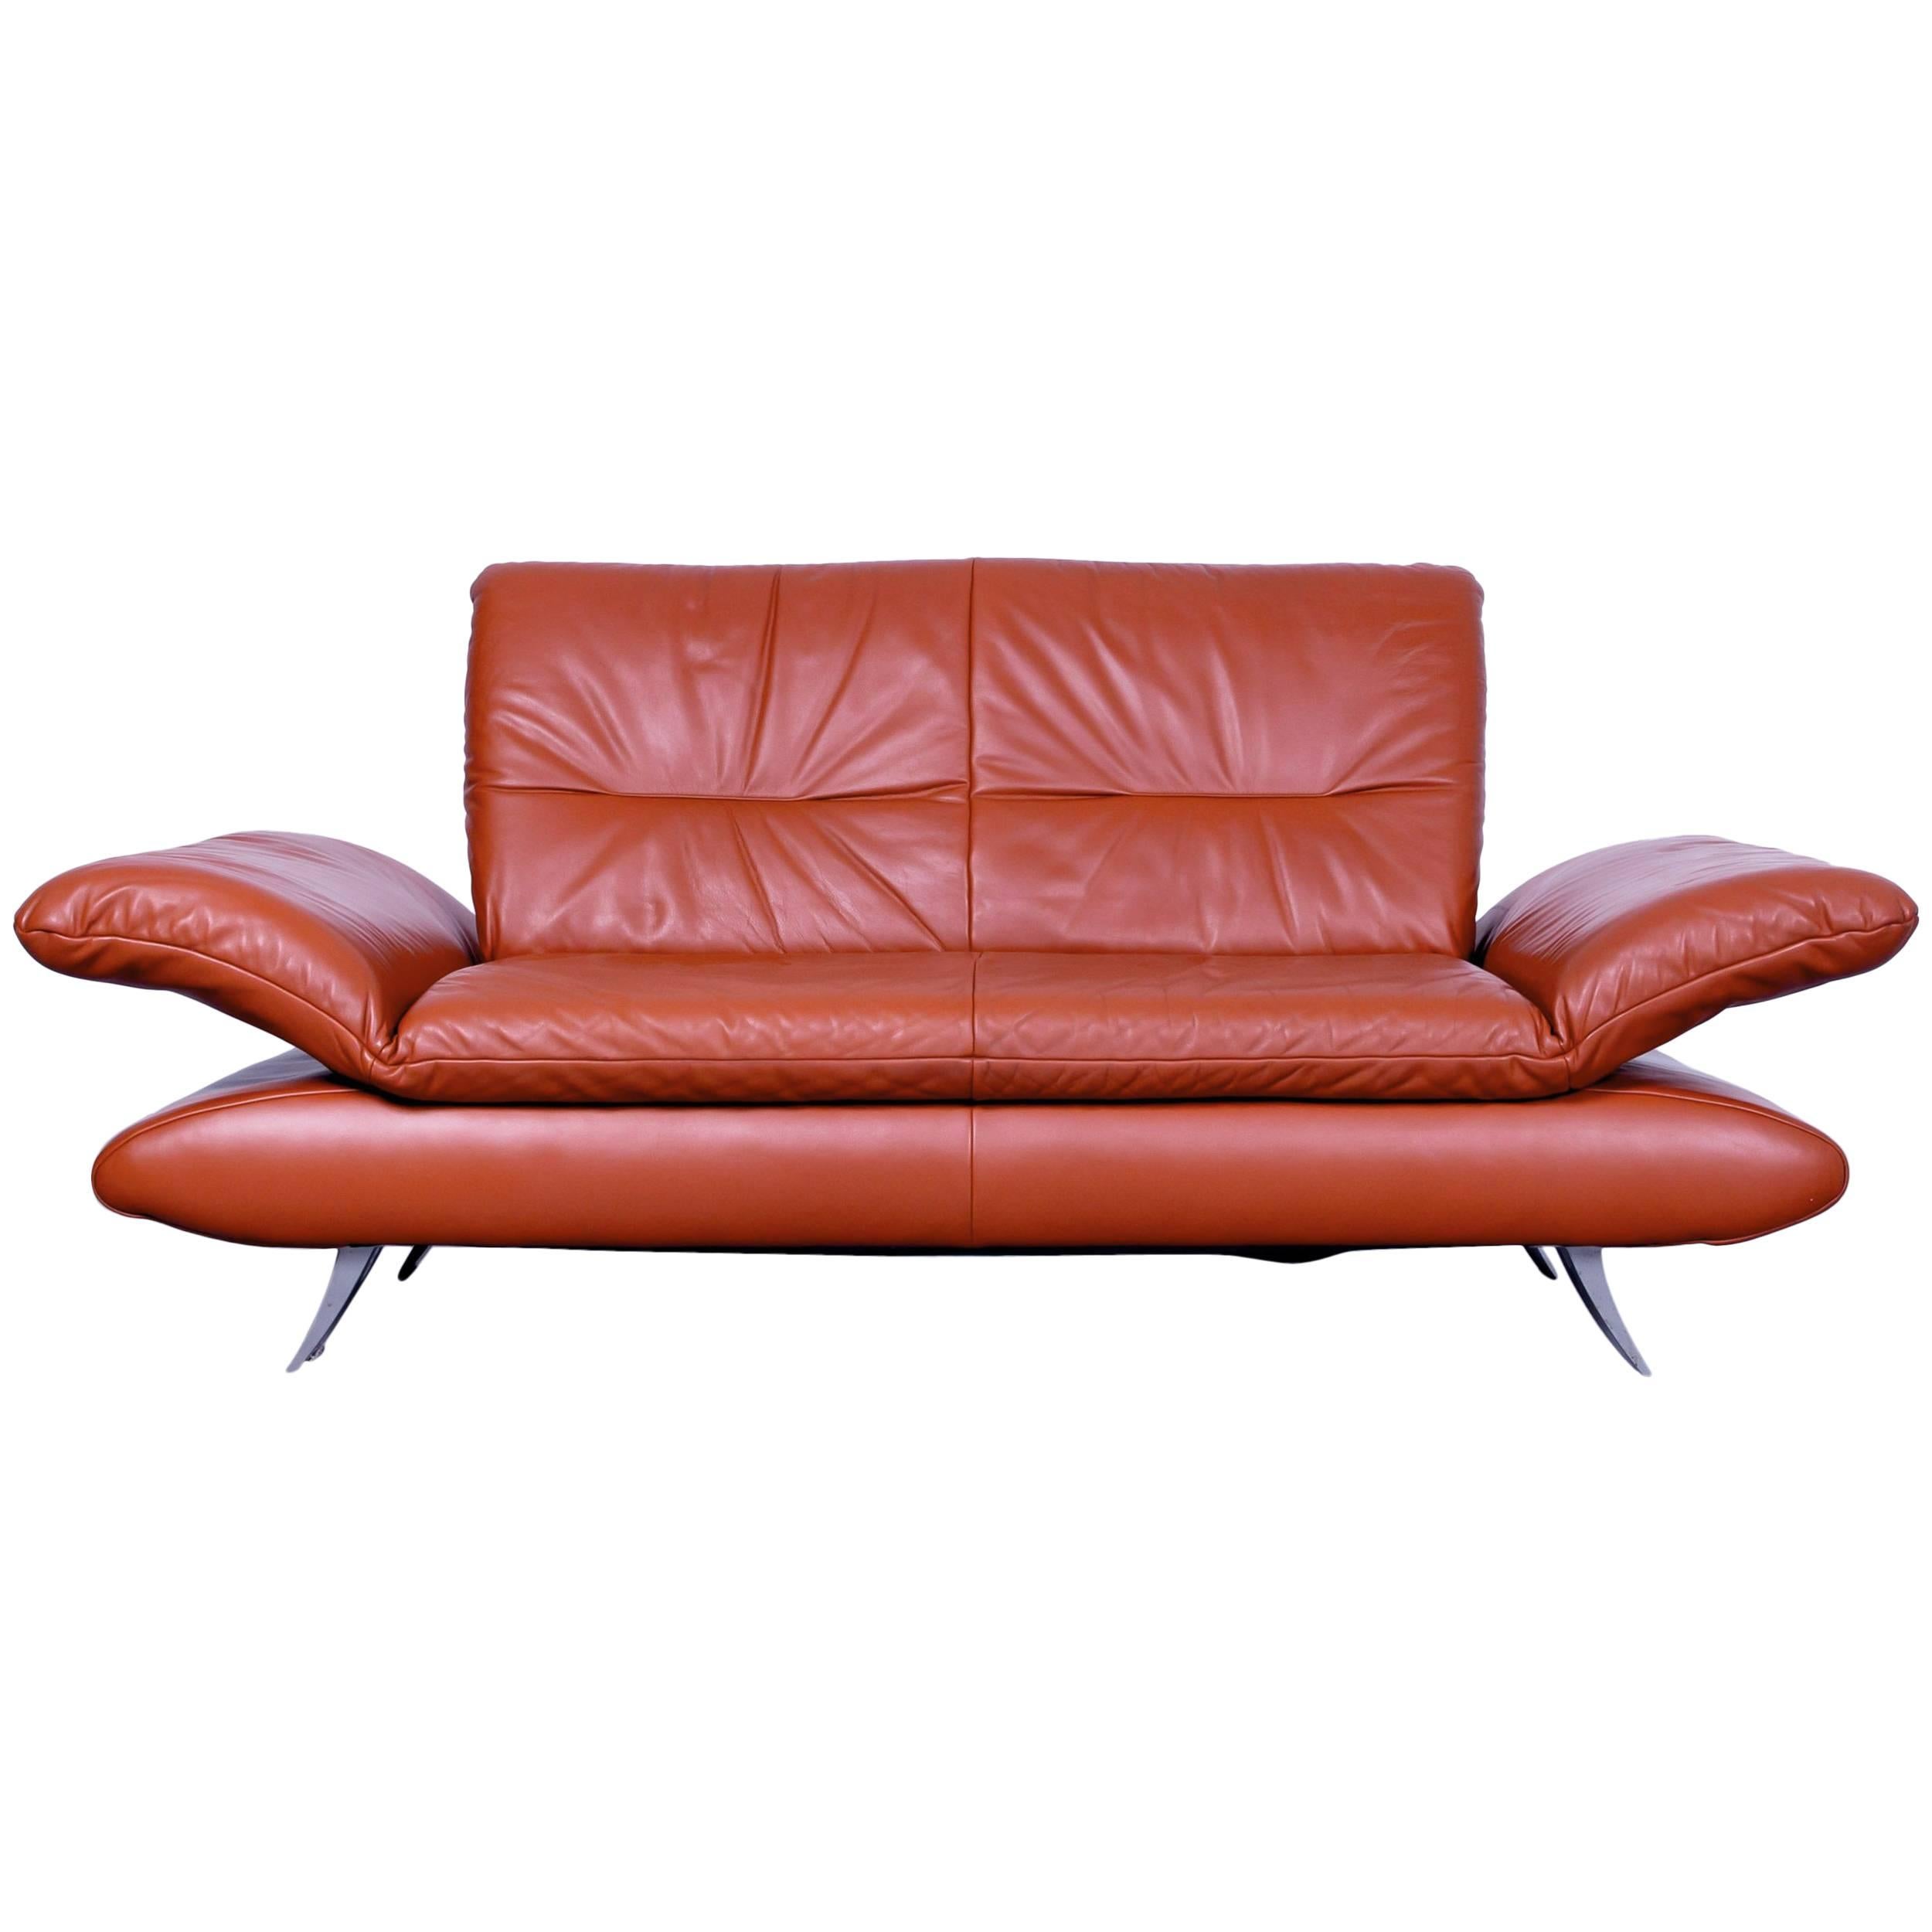 Koinor Rossini Designer Two-Seat Sofa Orange Red Leather Function Modern Two For Sale